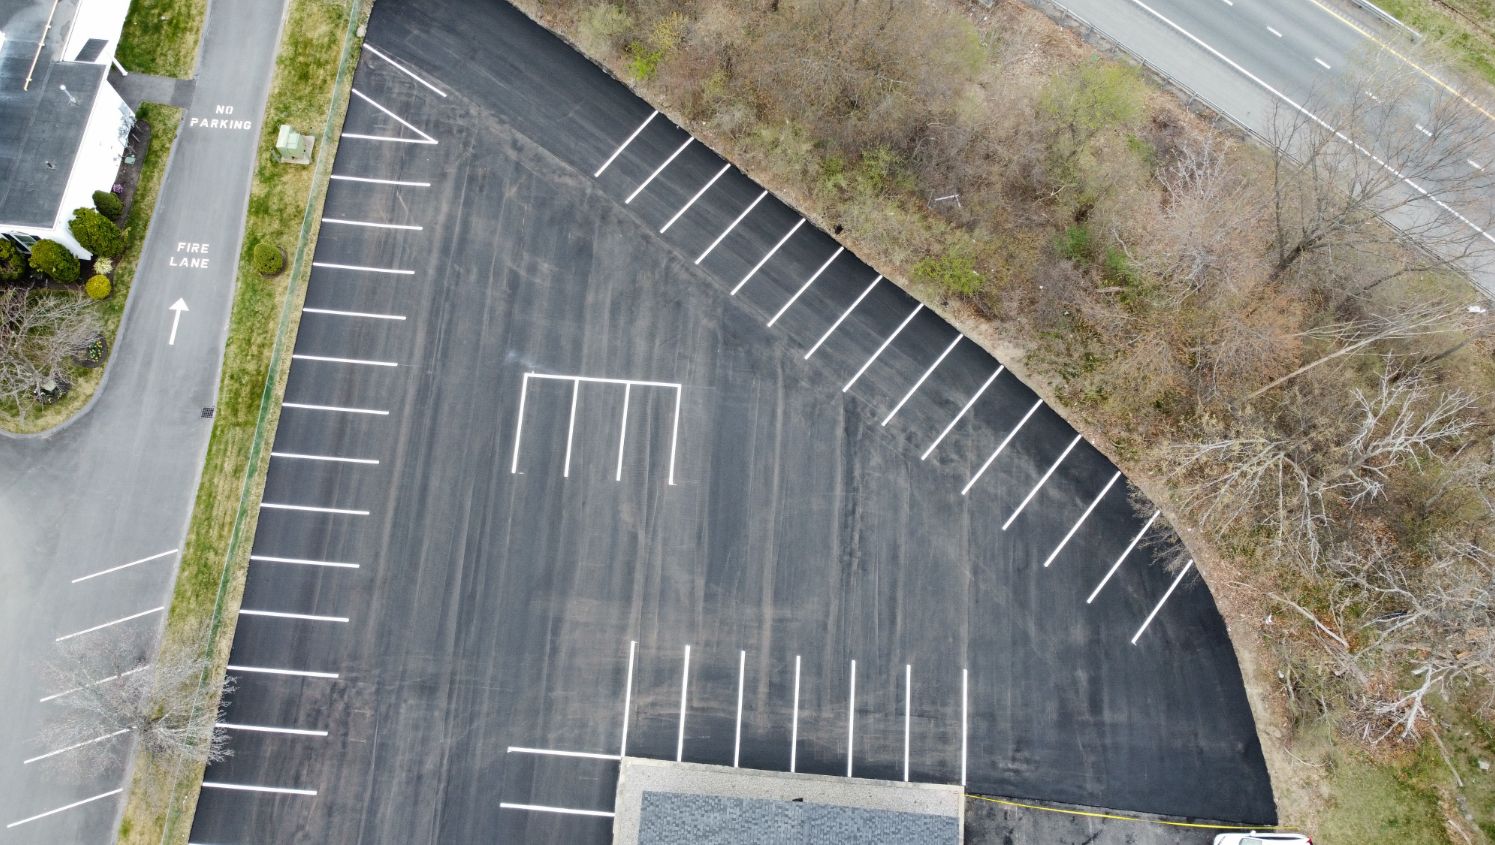 an aerial view of pavement with parking stalls